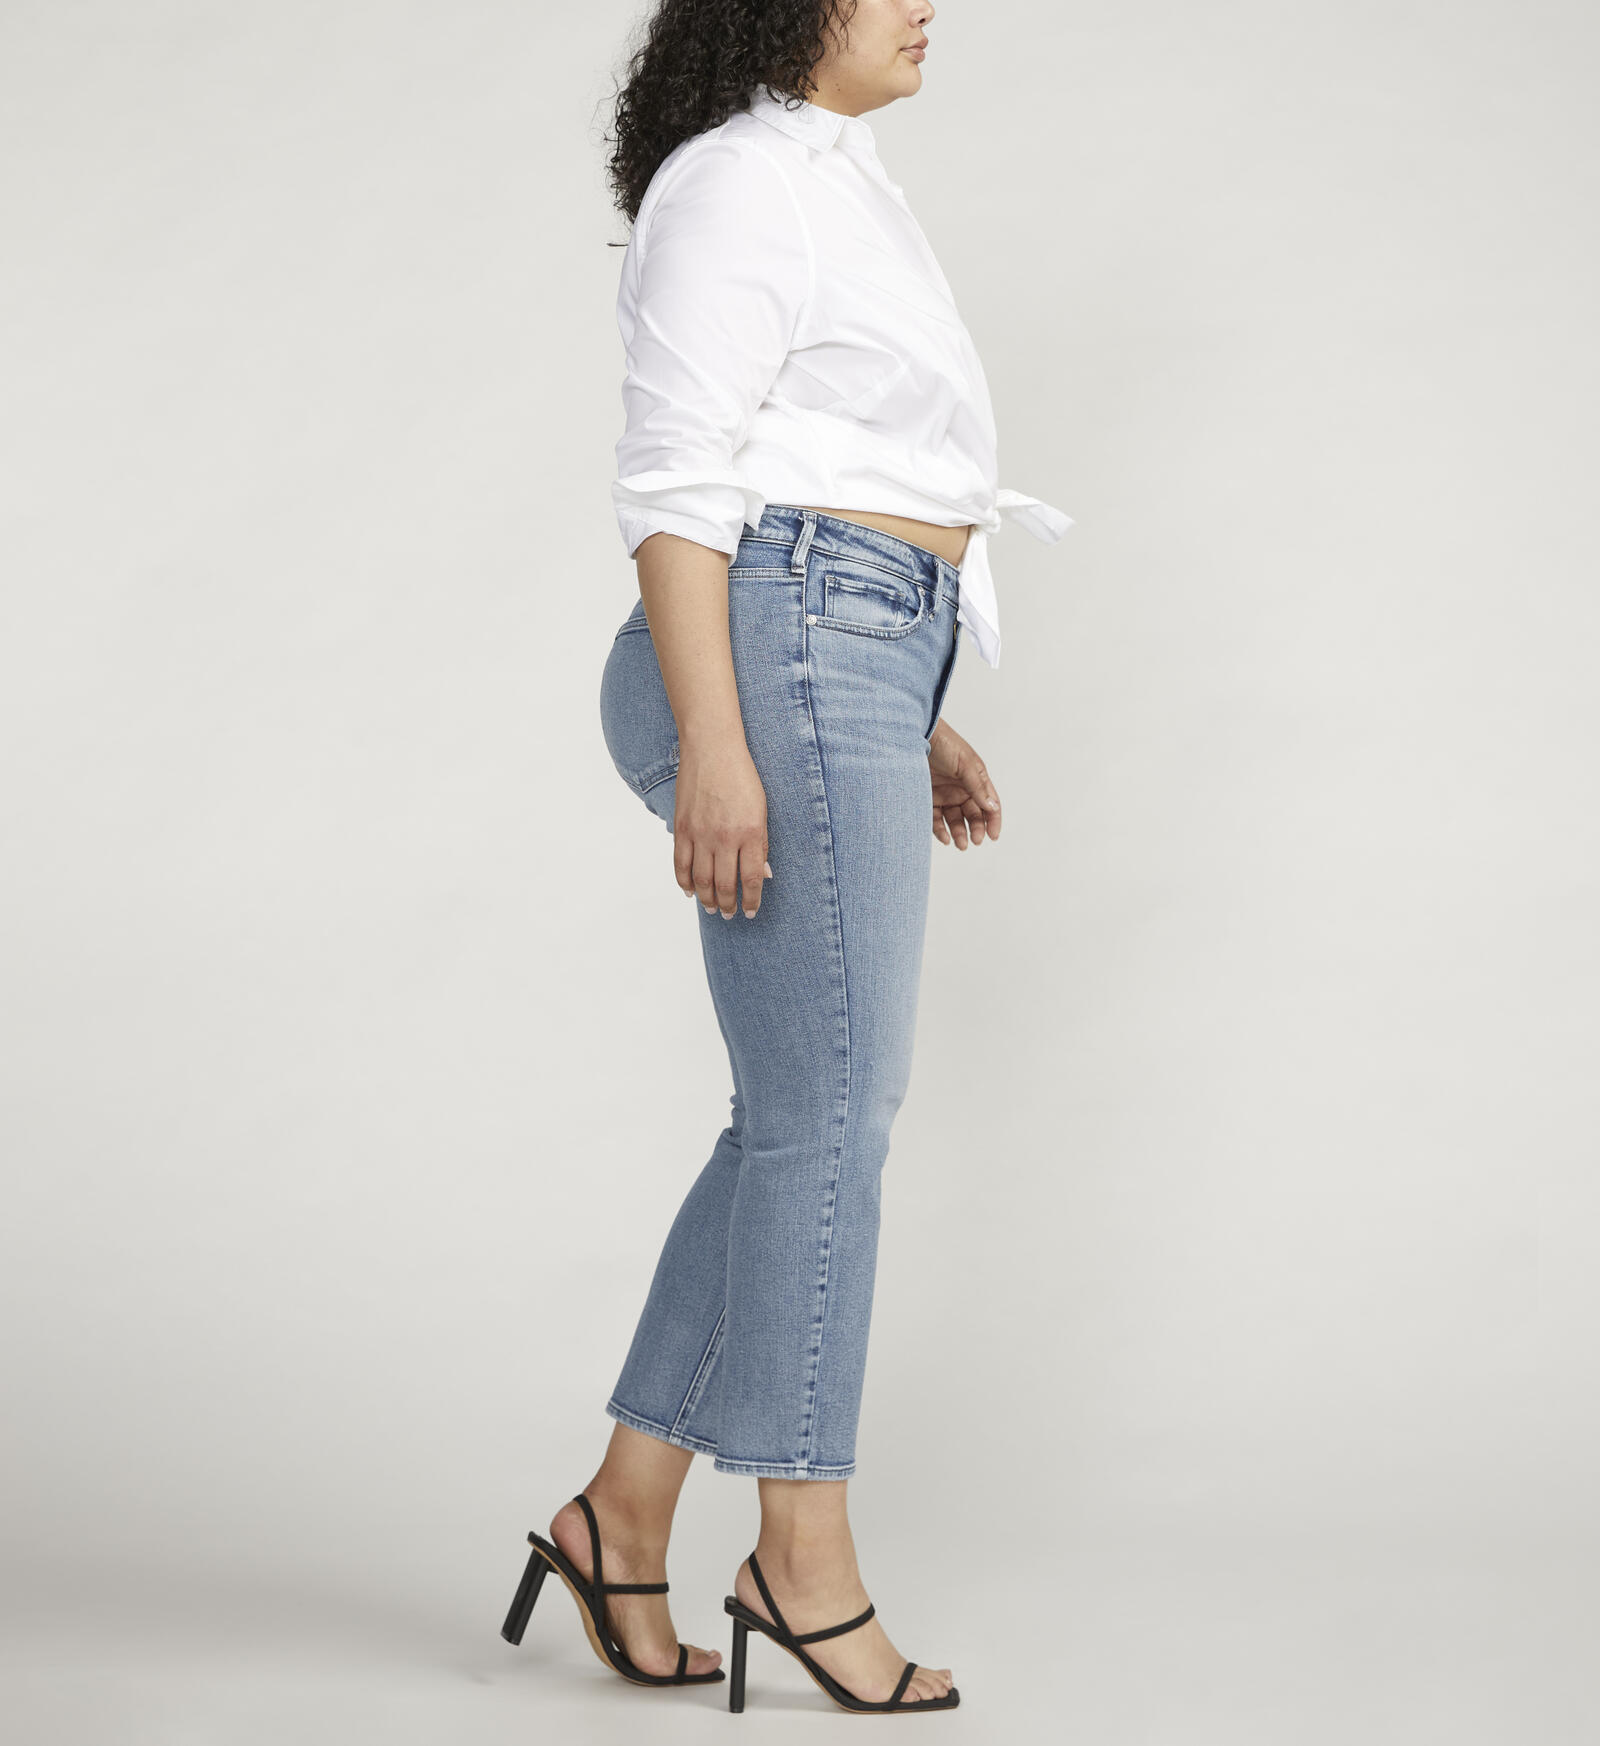 Buy Suki Mid Rise Slim Bootcut Jeans Plus Size for CAD 98.00